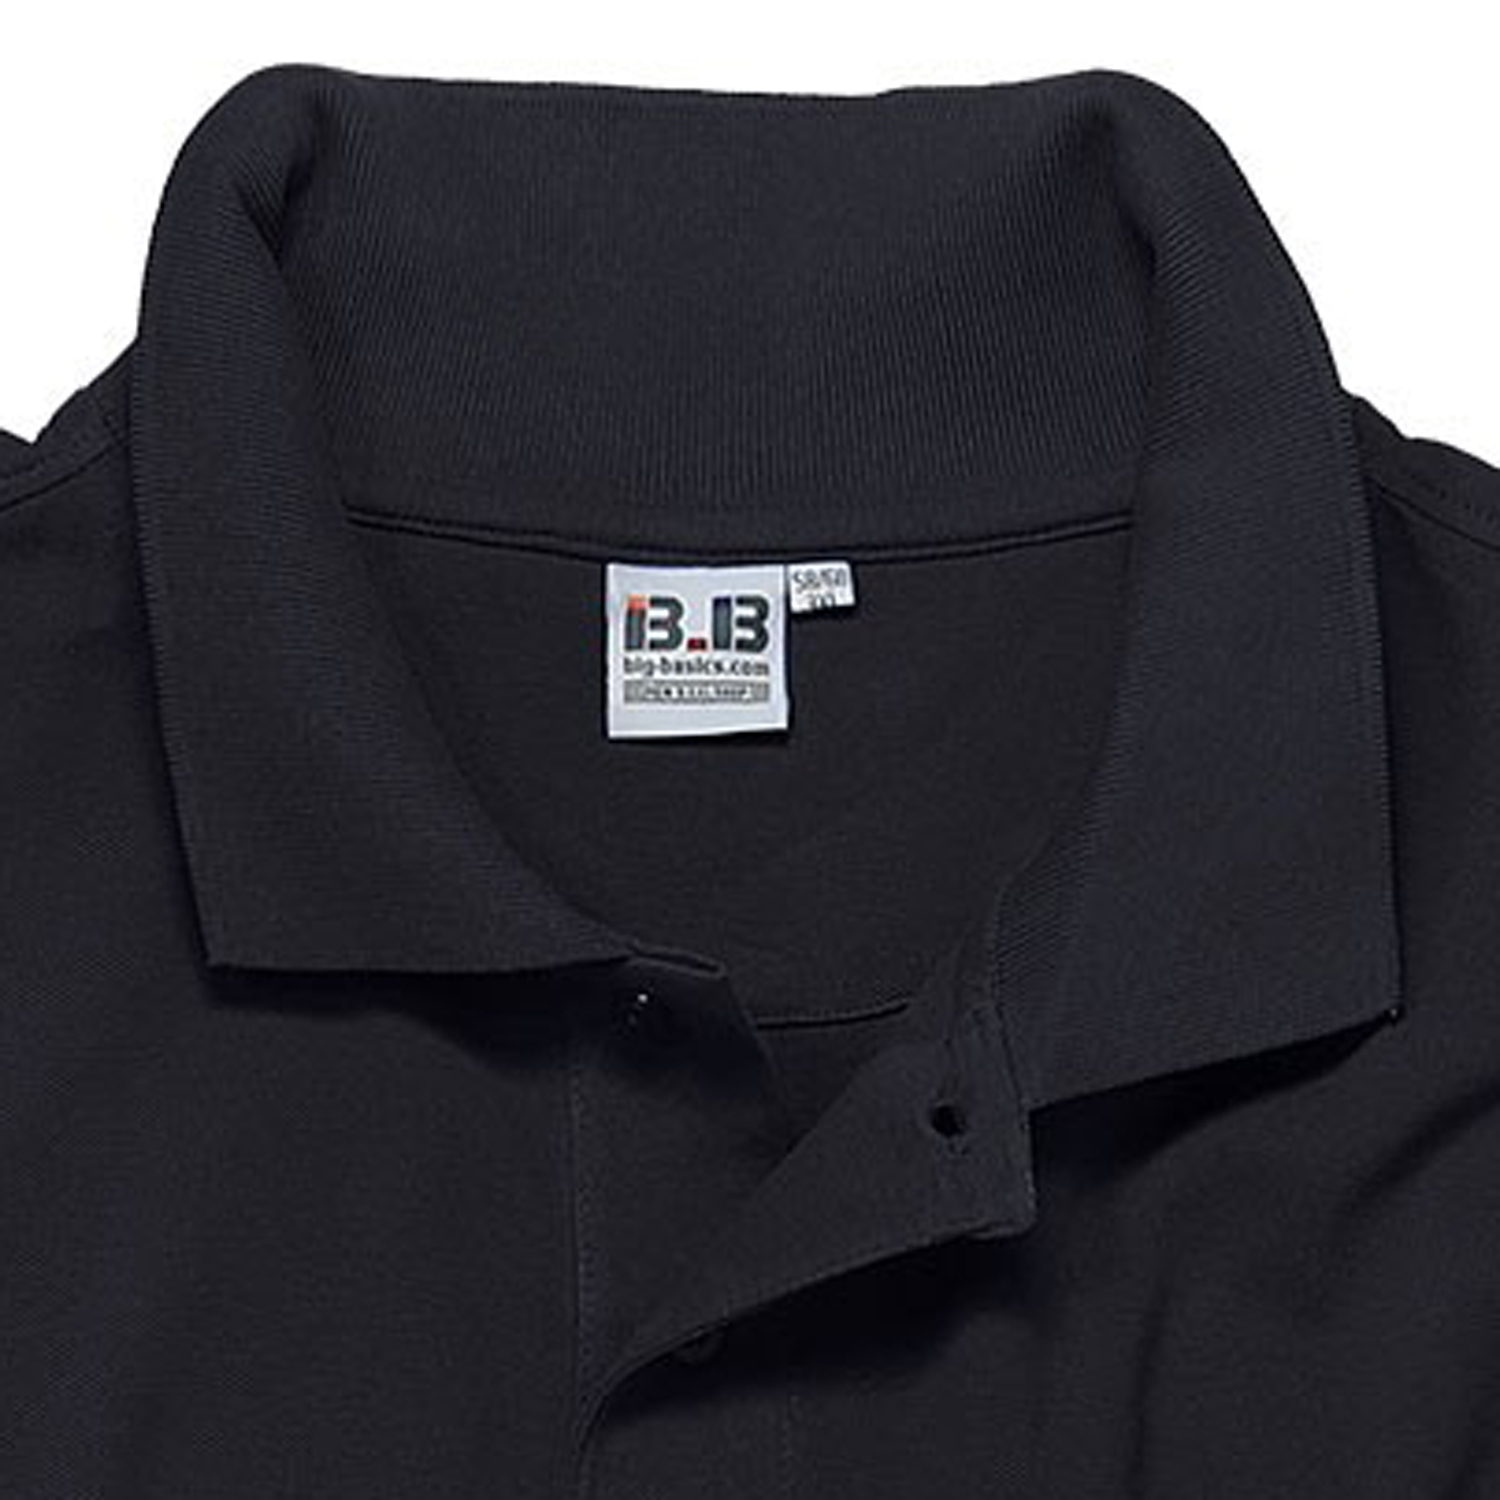 Black polo shirt by Big-Basics in oversizes up to 8XL